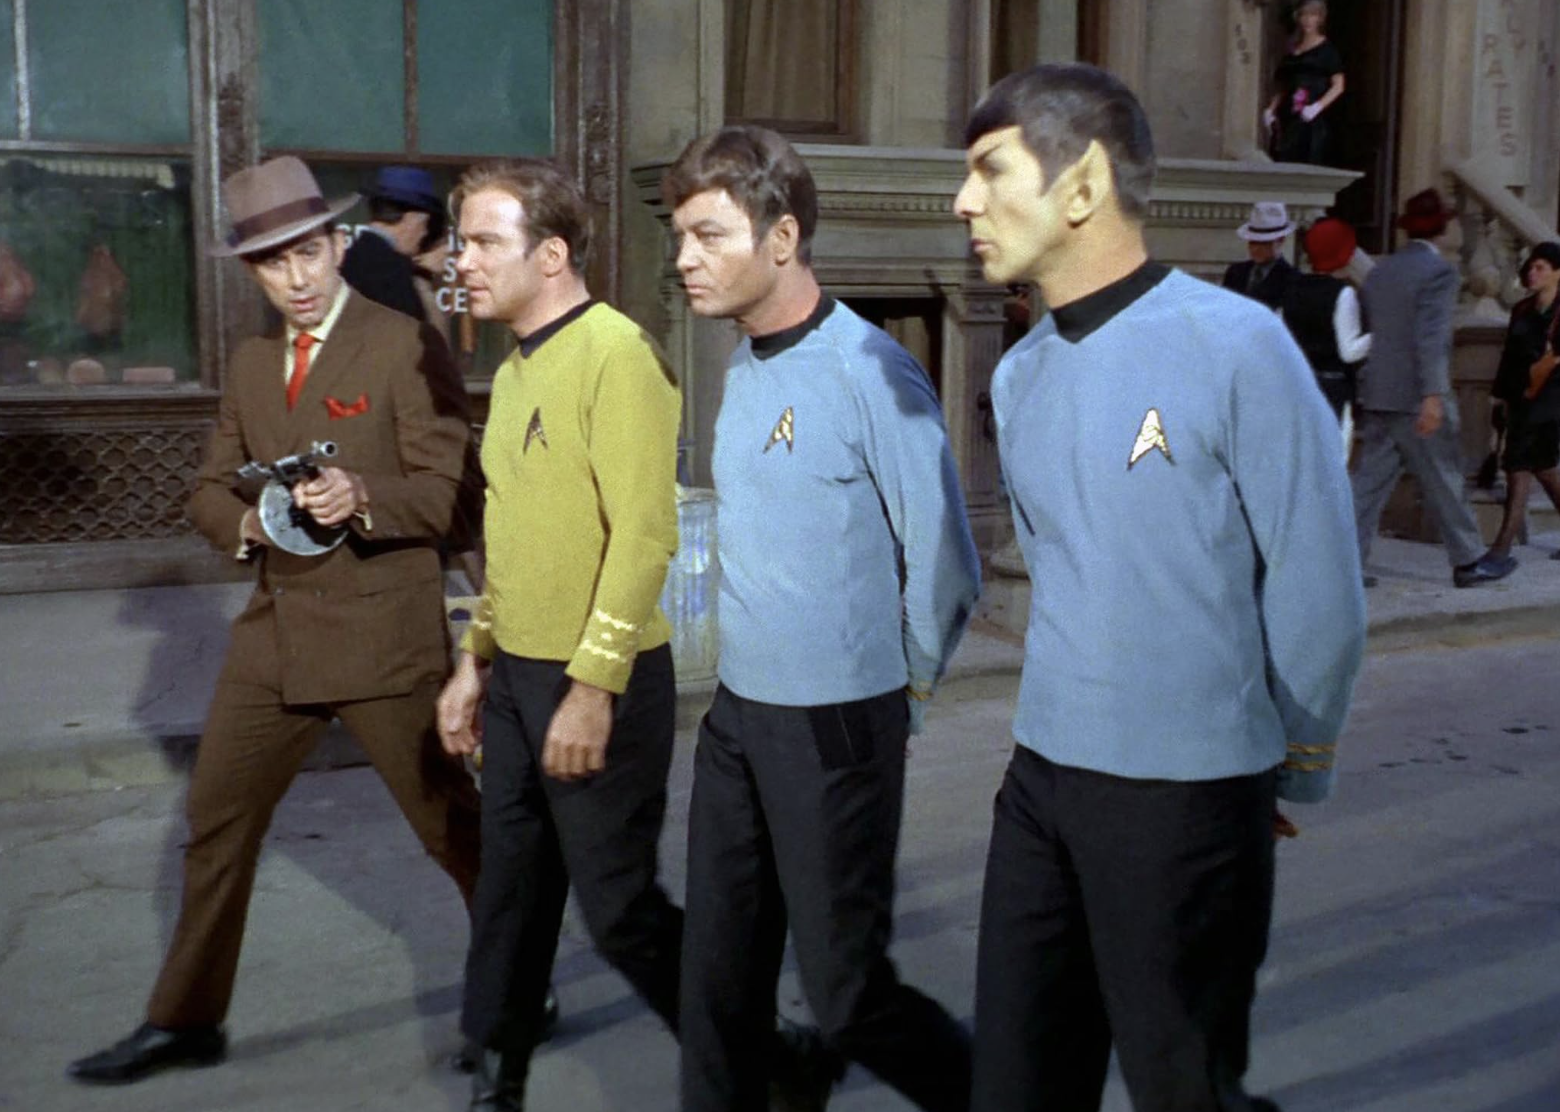 <p>- IMDb user rating: 7.7<br> - Season 2, Episode 17<br> - Director: James Komack</p>  <p>Sometimes, "Star Trek" likes to incorporate time travel to create period-piece episodes, but in the case of Season Two, Episode 17, Kirk, Spock, and McCoy land on a planet that emulates 1920s Chicago gangster culture. With Tommy guns, fedoras, and pulpy 1920s dialogue, this fun episode goes through many of the classic gangster tropes. It's a memorable episode, particularly to writer-director Quentin Tarantino, who in the late 2010s wanted to <a href="https://variety.com/feature/quentin-tarantino-star-trek-explained-1235184059/">direct a rated-R "Star Trek" movie inspired by the episode</a>.</p>